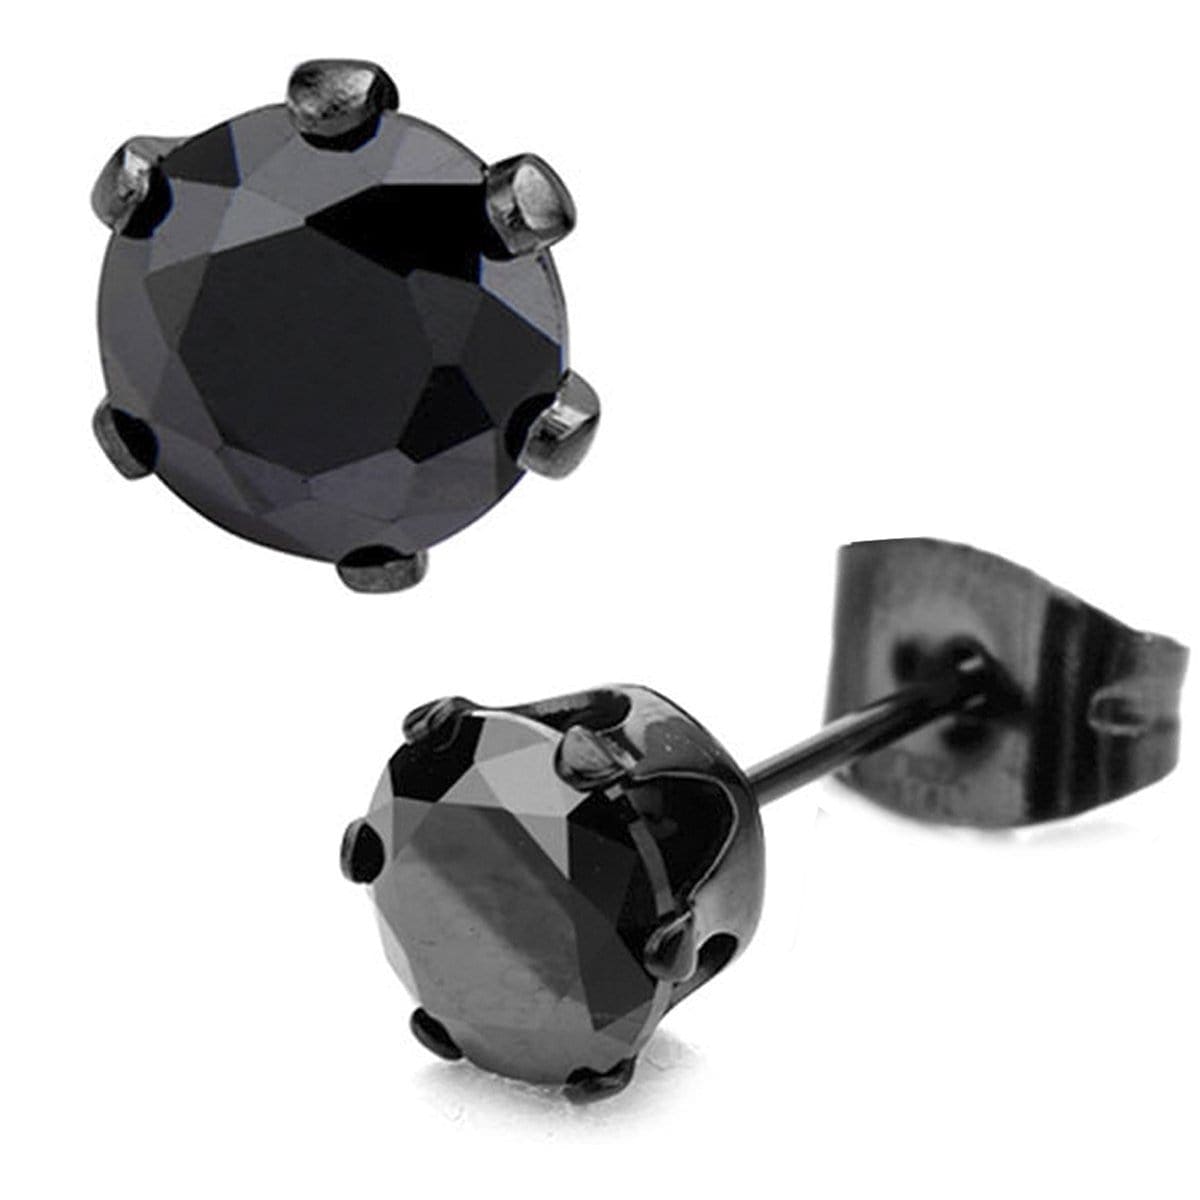 INOX JEWELRY Earrings Black Stainless Steel Six Prong Black CZ Solitaire Studs